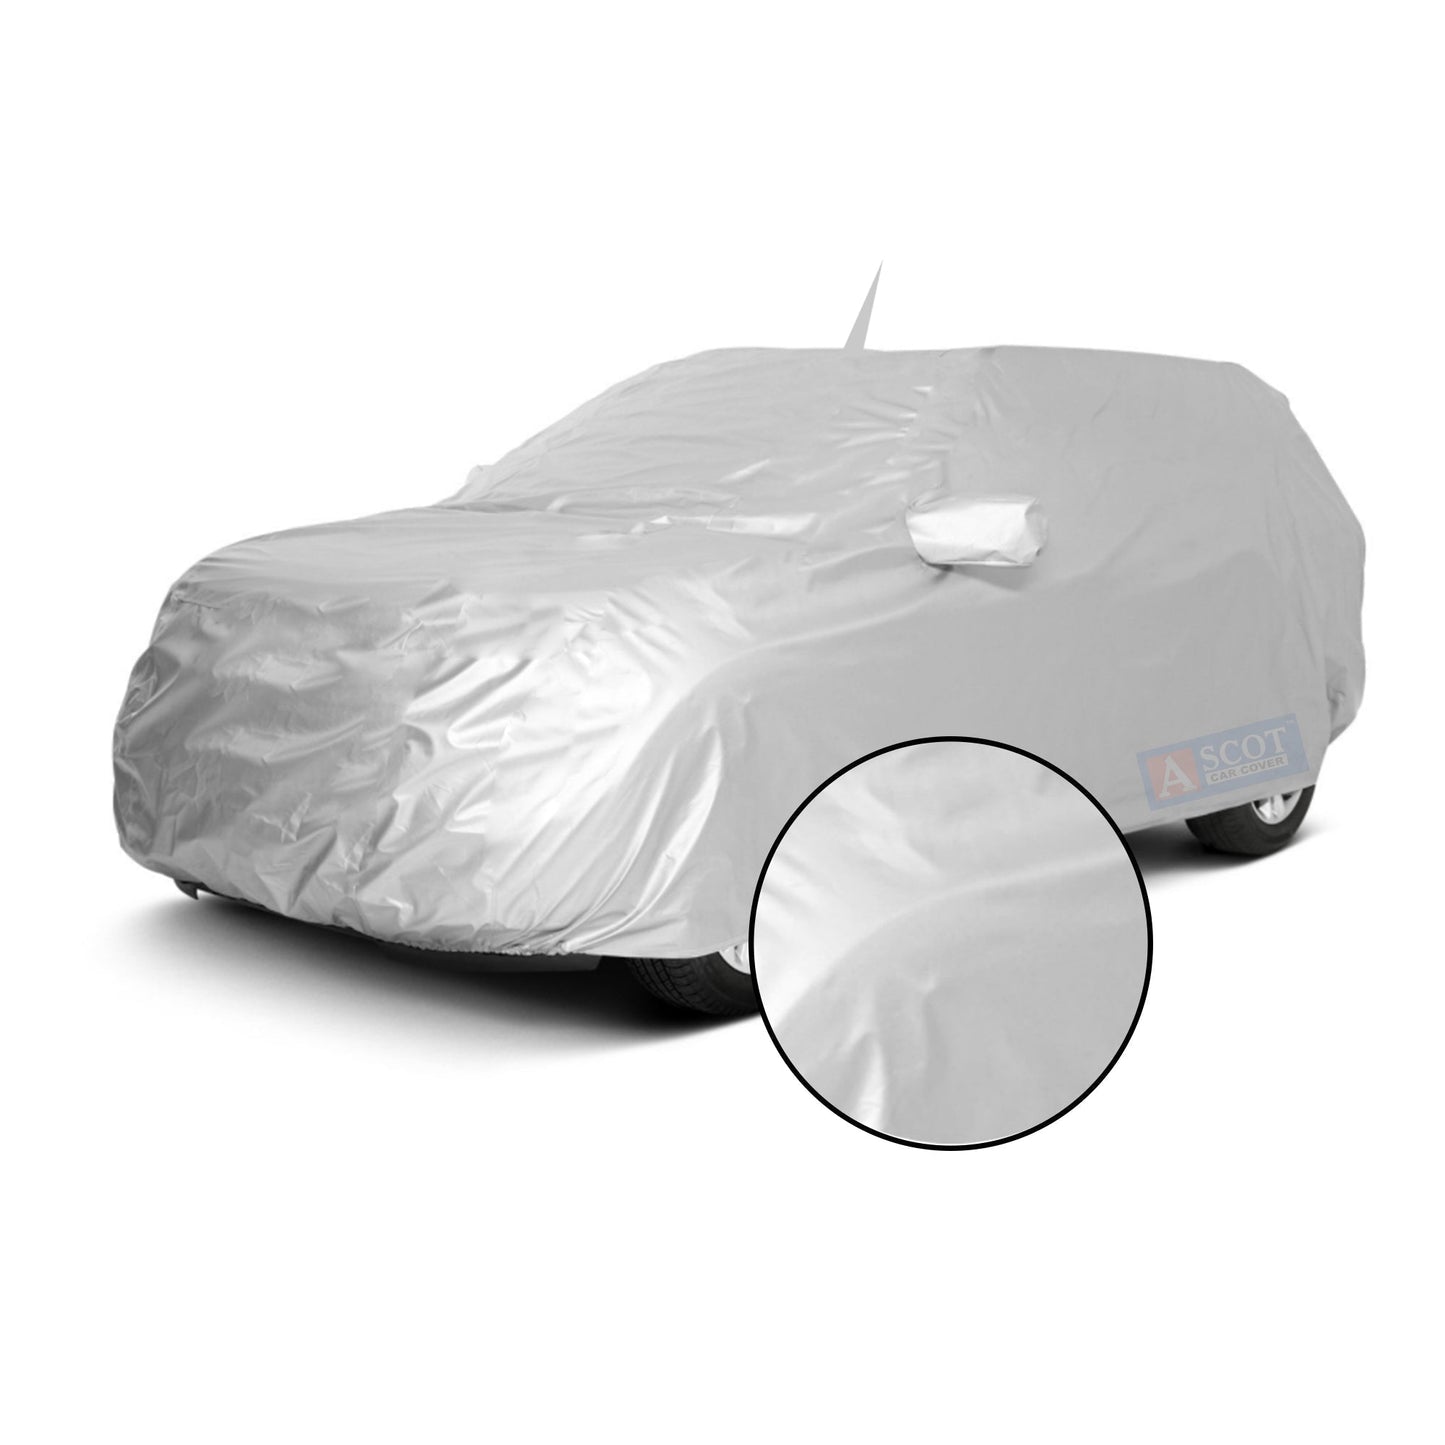 Ascot Chevrolet Beat Car Body Cover Dust Proof, Trippel Stitched